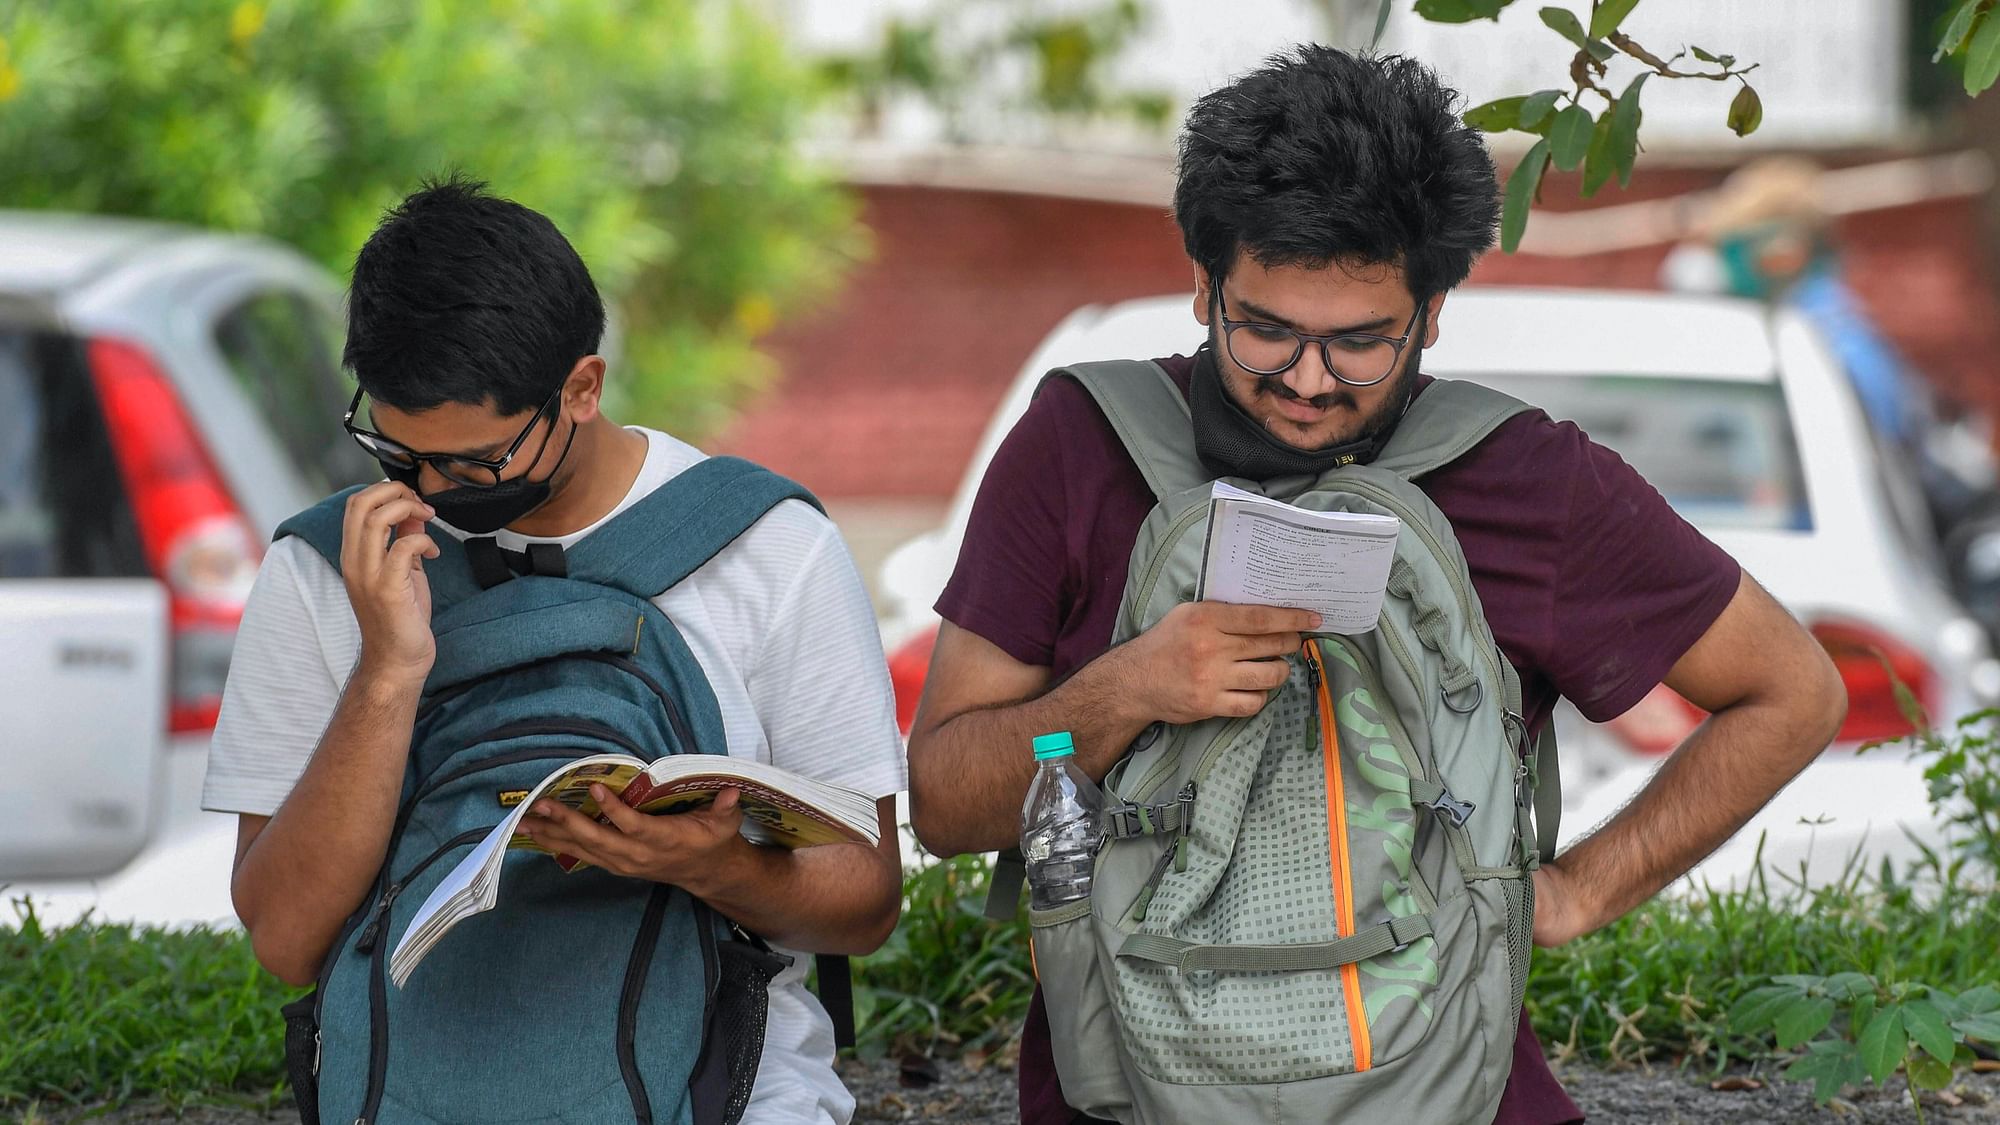 MH CET Entrance Exam 2020: The college entrance exam will be divided into three papers, with a total of 250 questions.